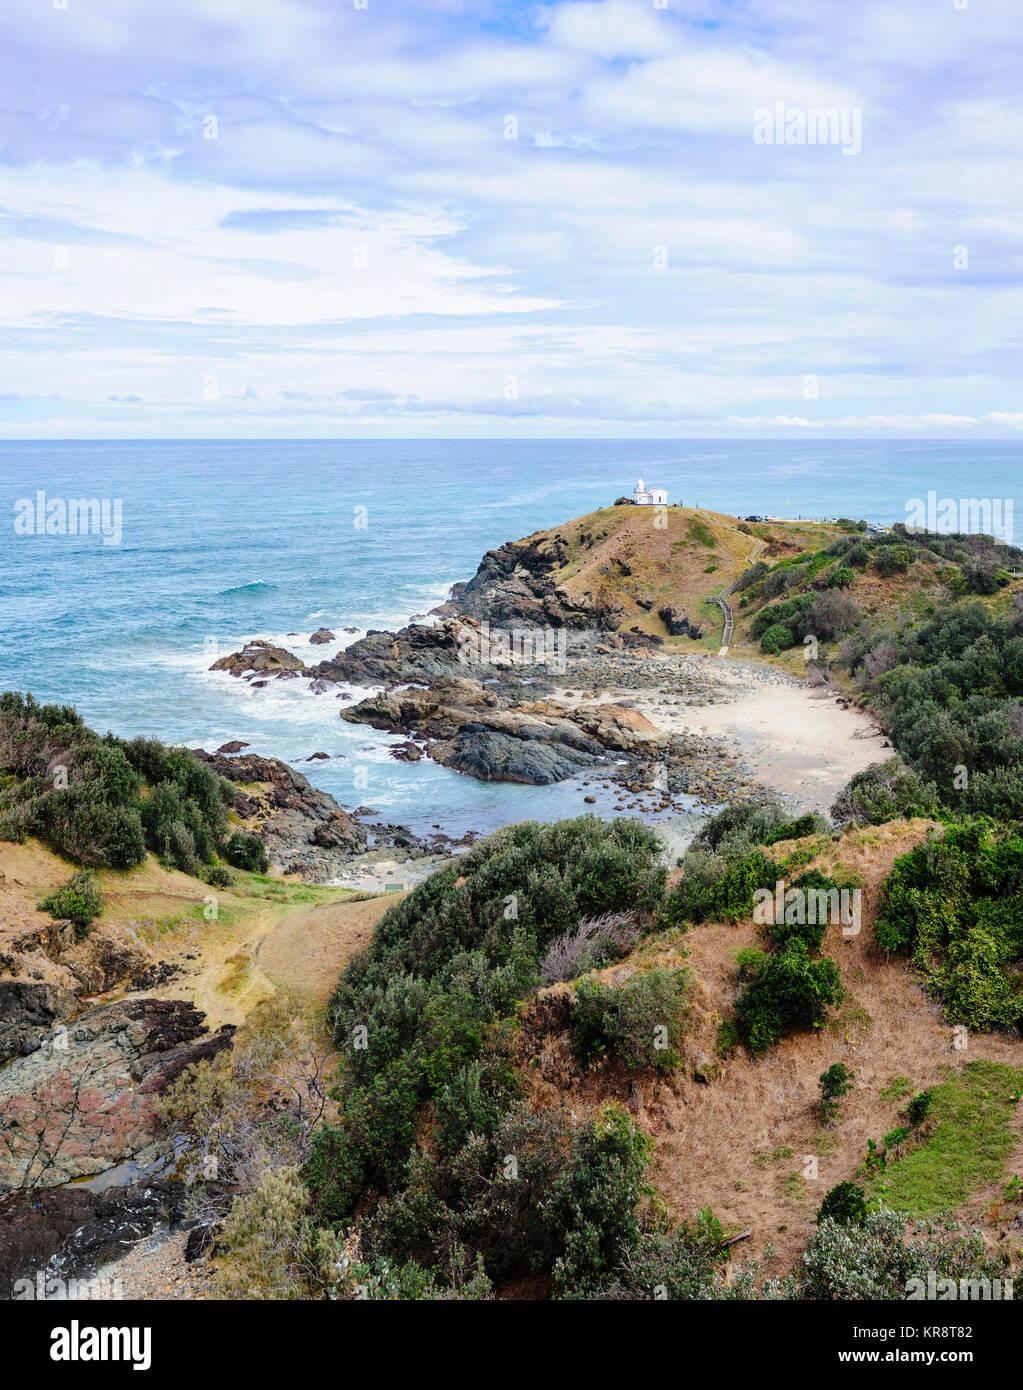 Australia, New South Wales, Landscape of cliff and sea Stock Photo